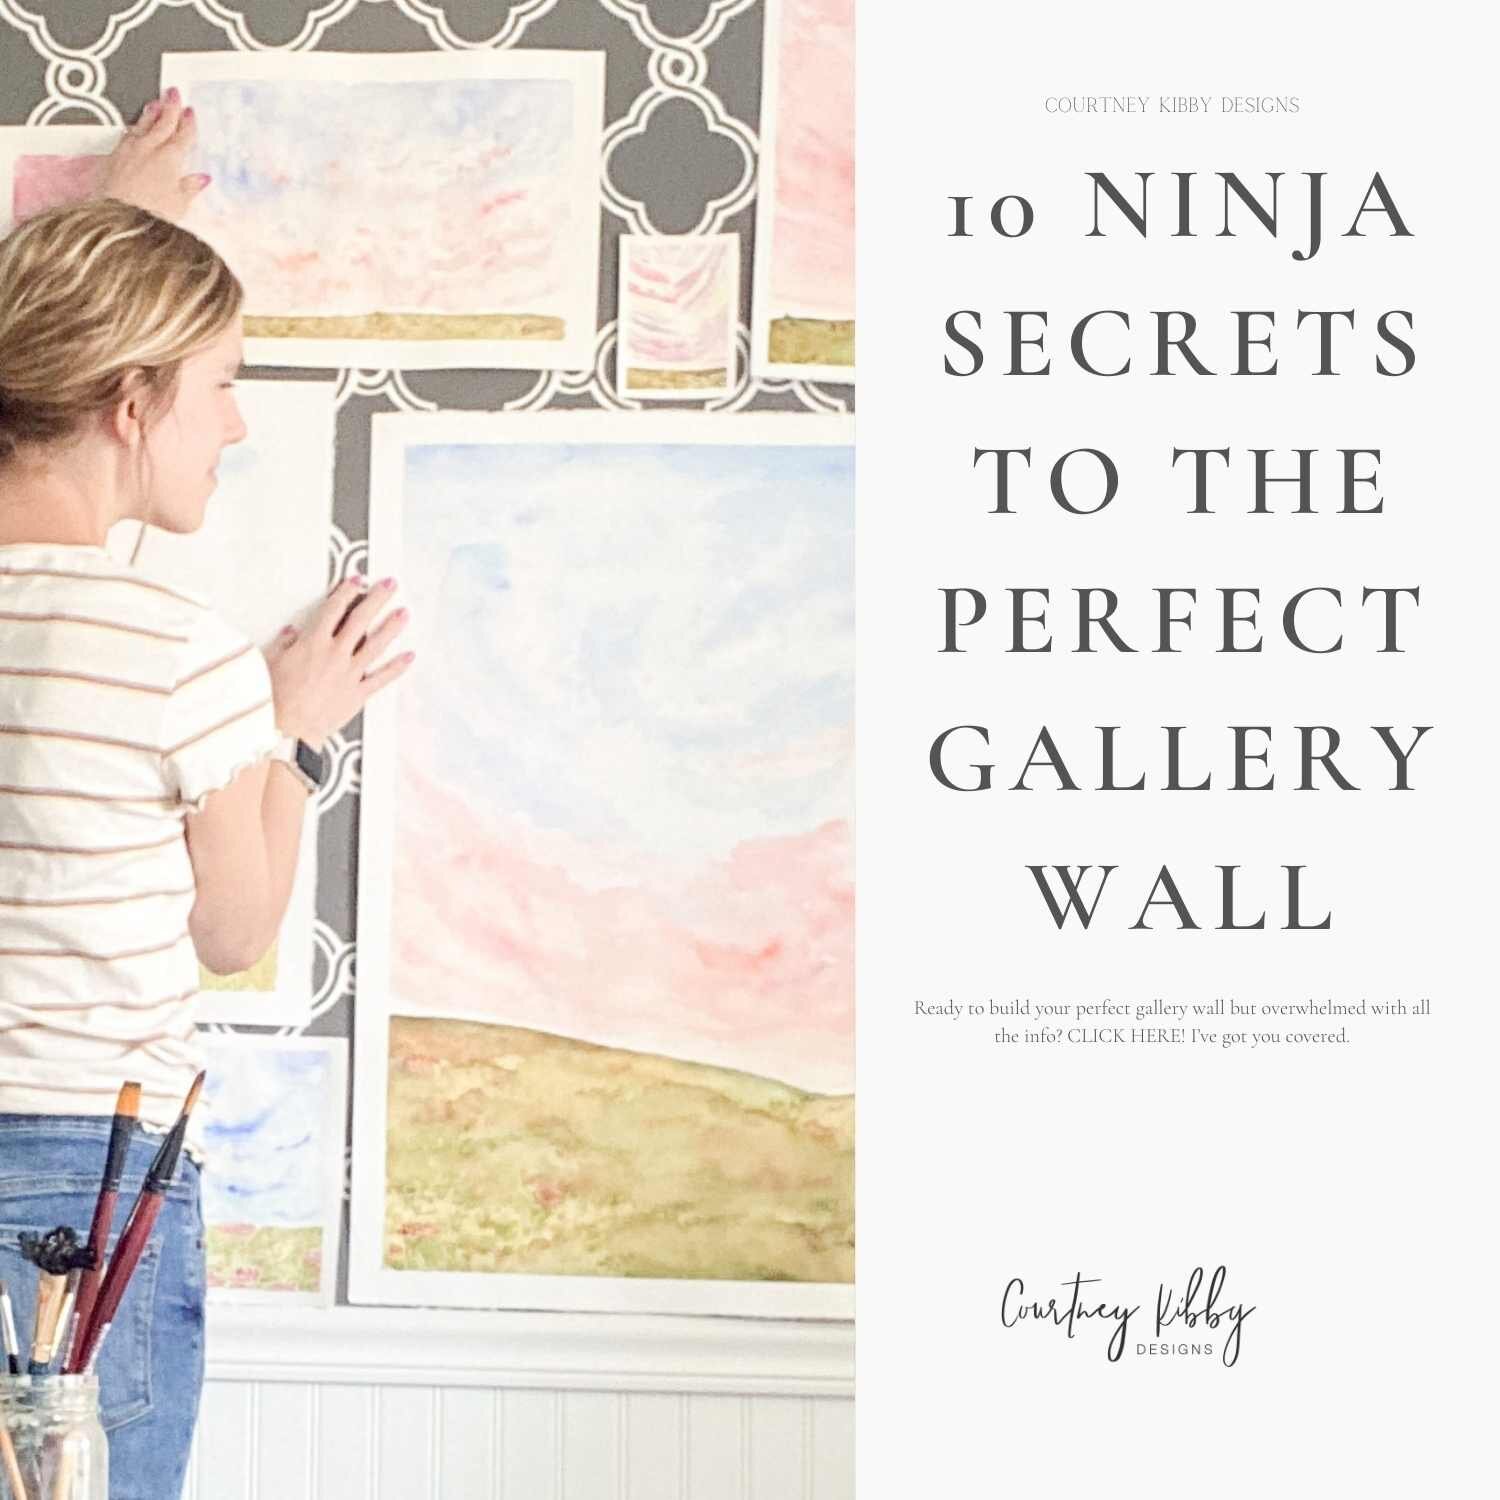 How to make the perfect gallery wall courtney kibby designs